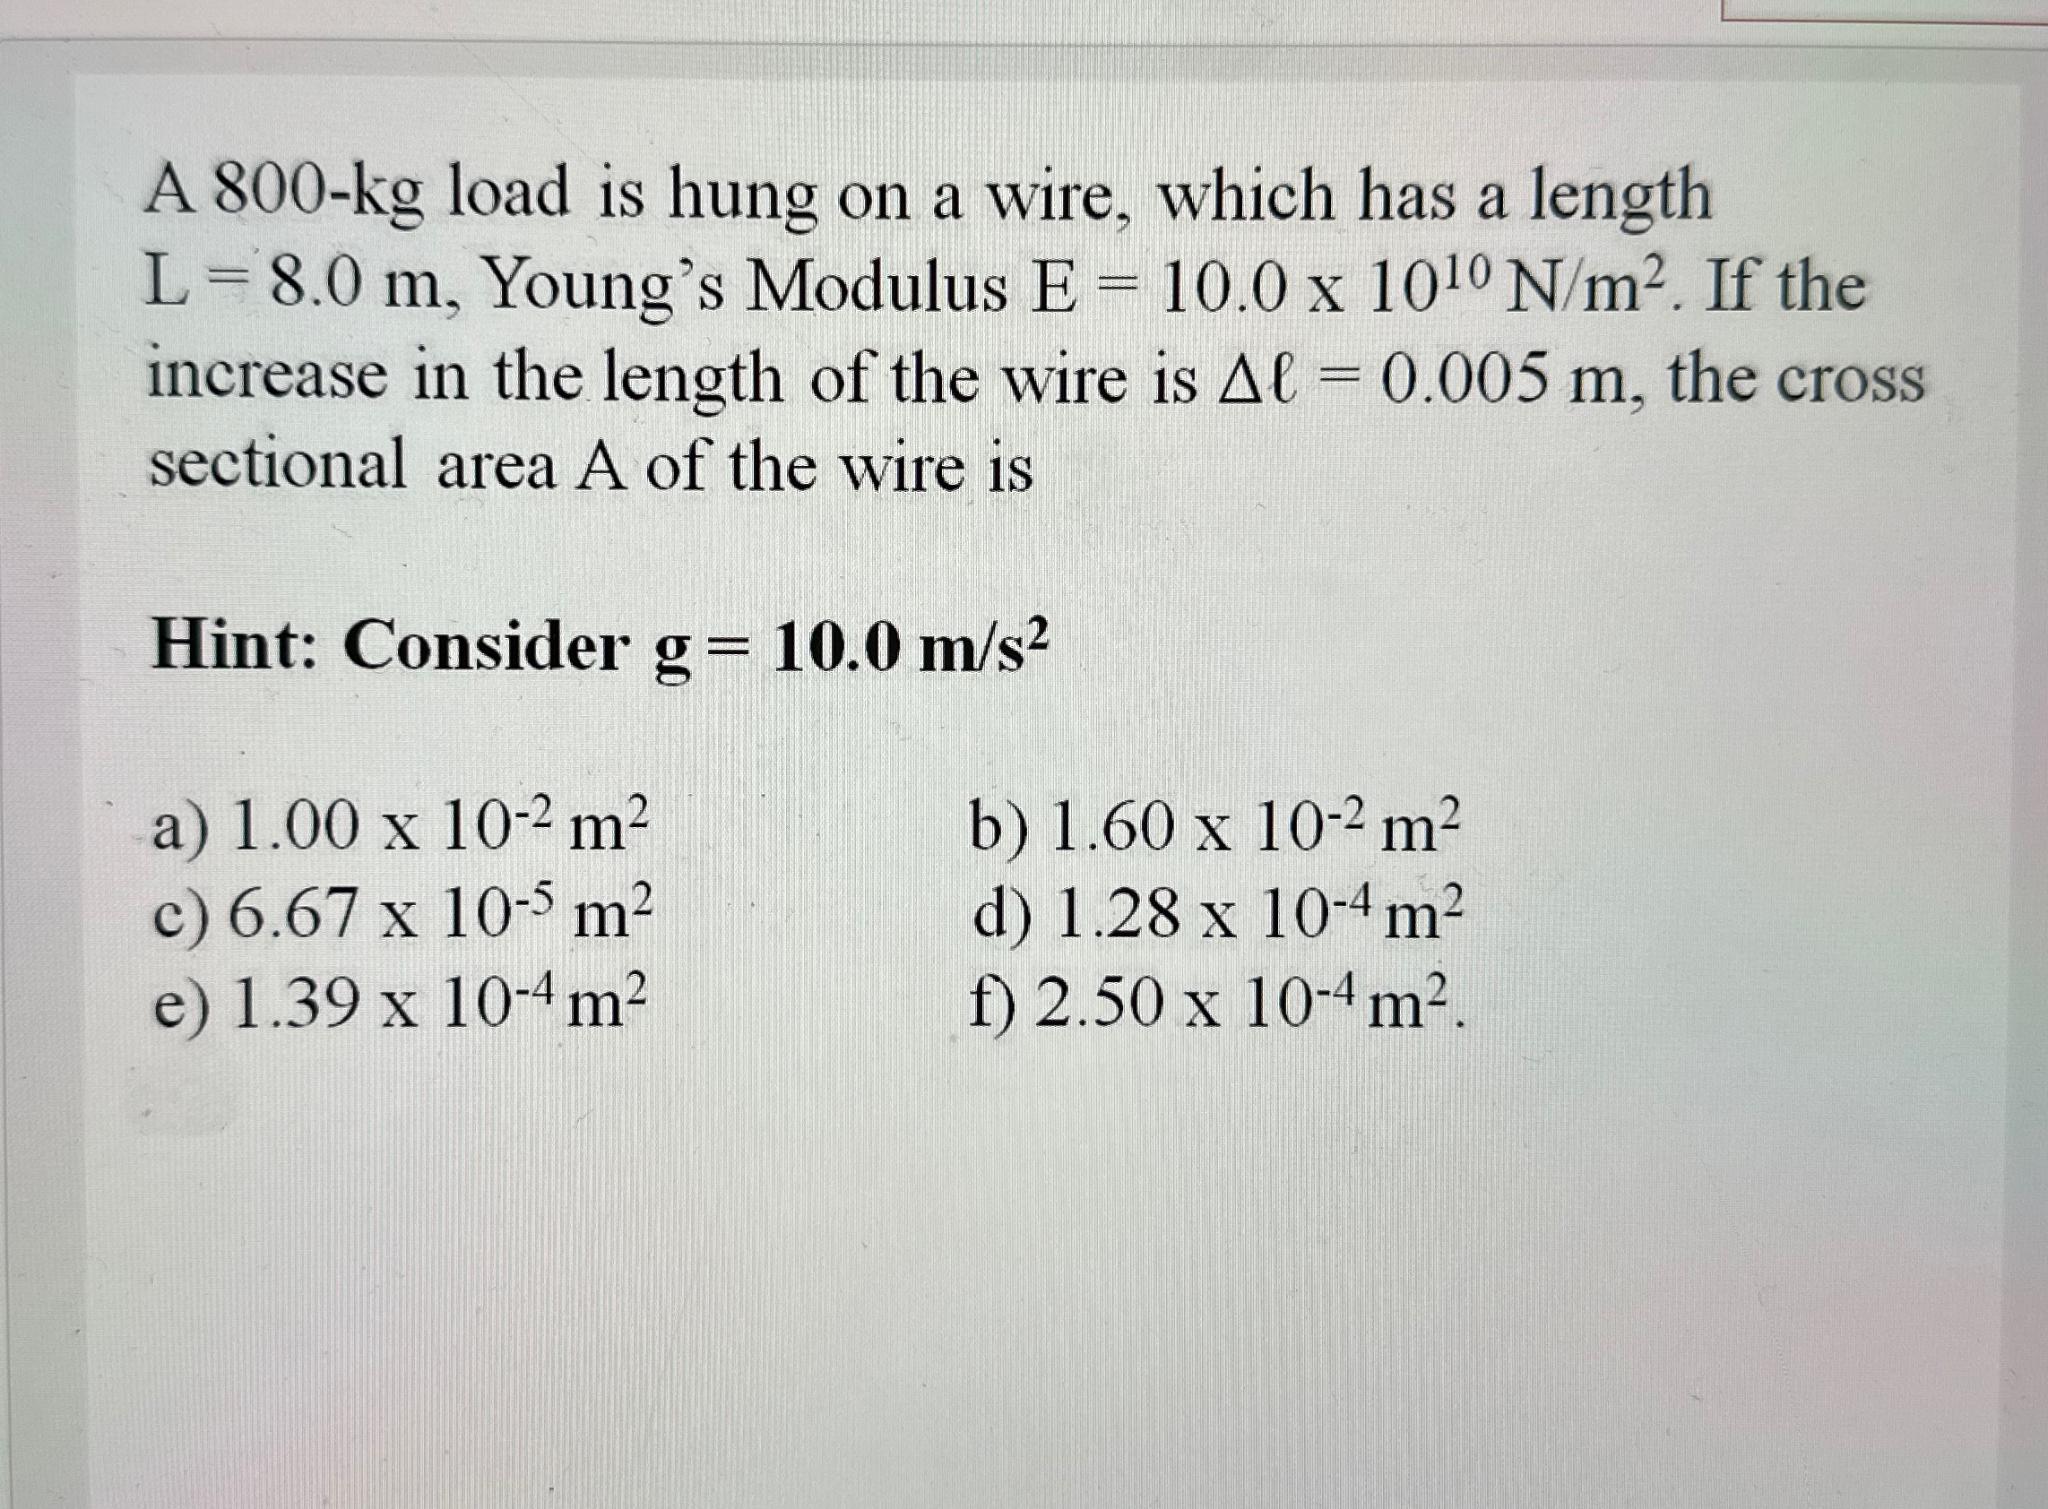 A 800-kg load is hung on a wire, which has a length L = 8.0 m, Young's Modulus E = 10.0 x 100 N/m. If the